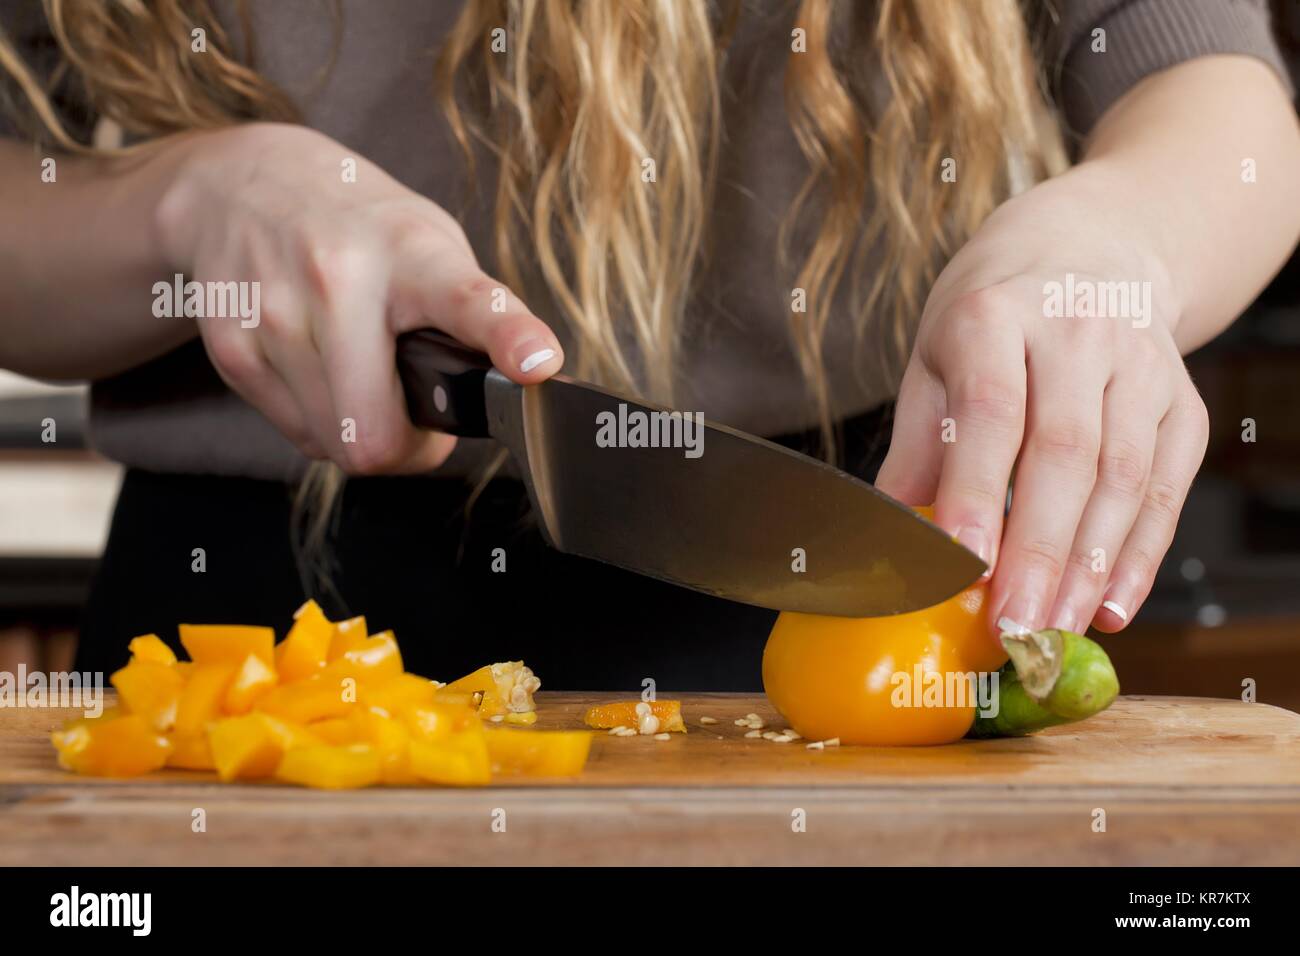 woman slicing bell pepper Stock Photo